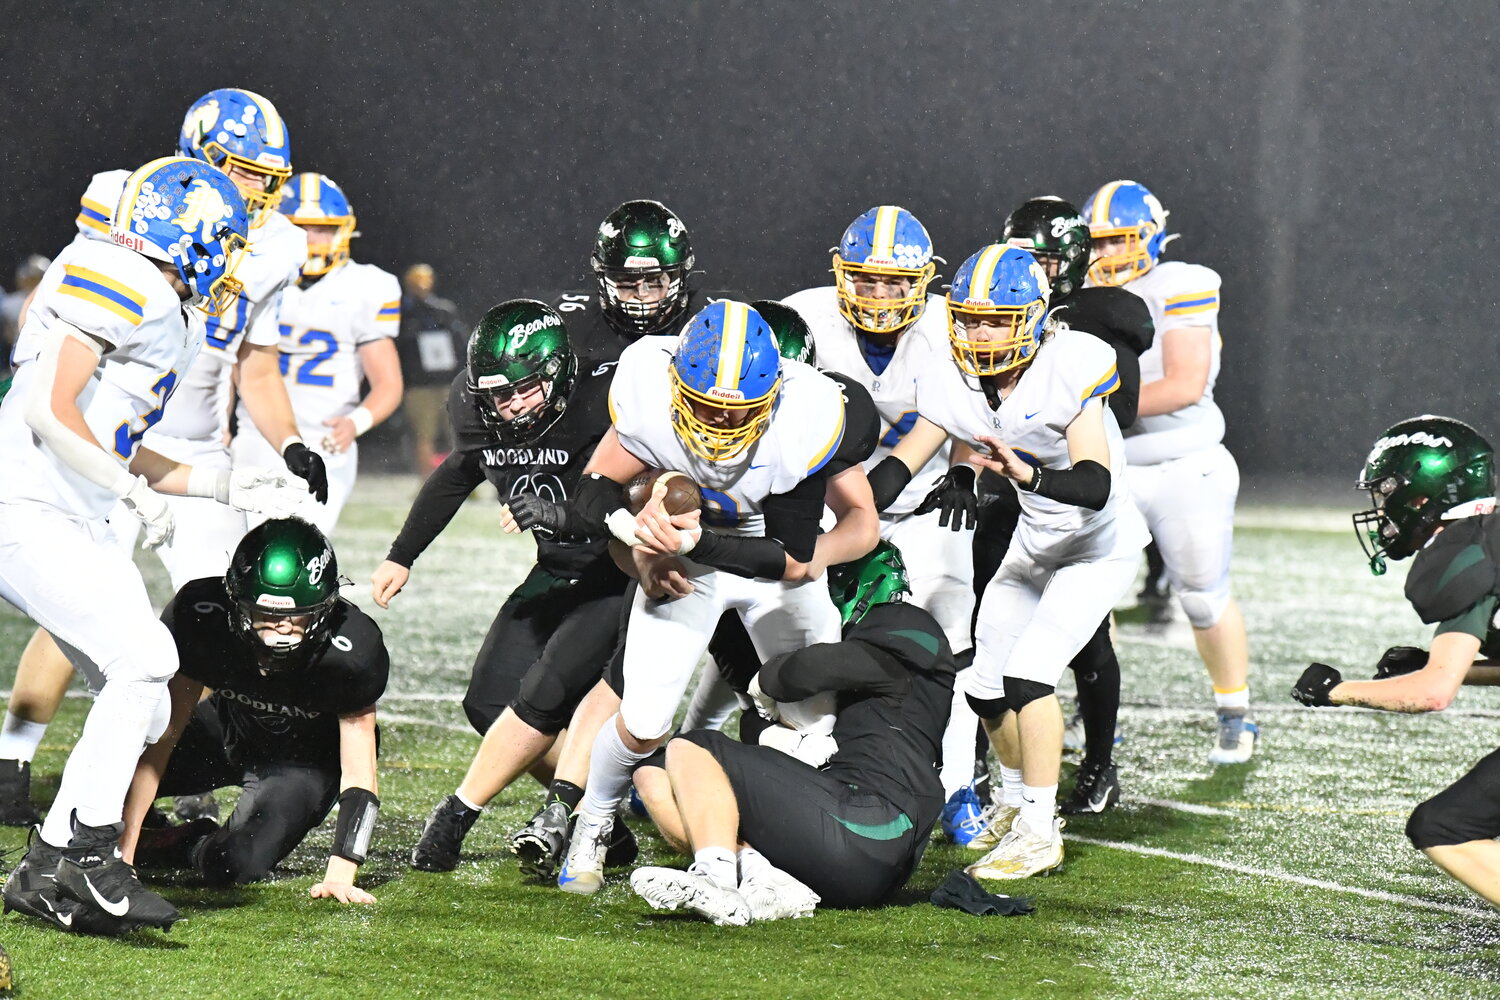 Mason Armstrong can't break free from the Woodland defense in Rochester's 33-8 loss to the Beavers a district crossover game, Nov. 3 in Woodland.